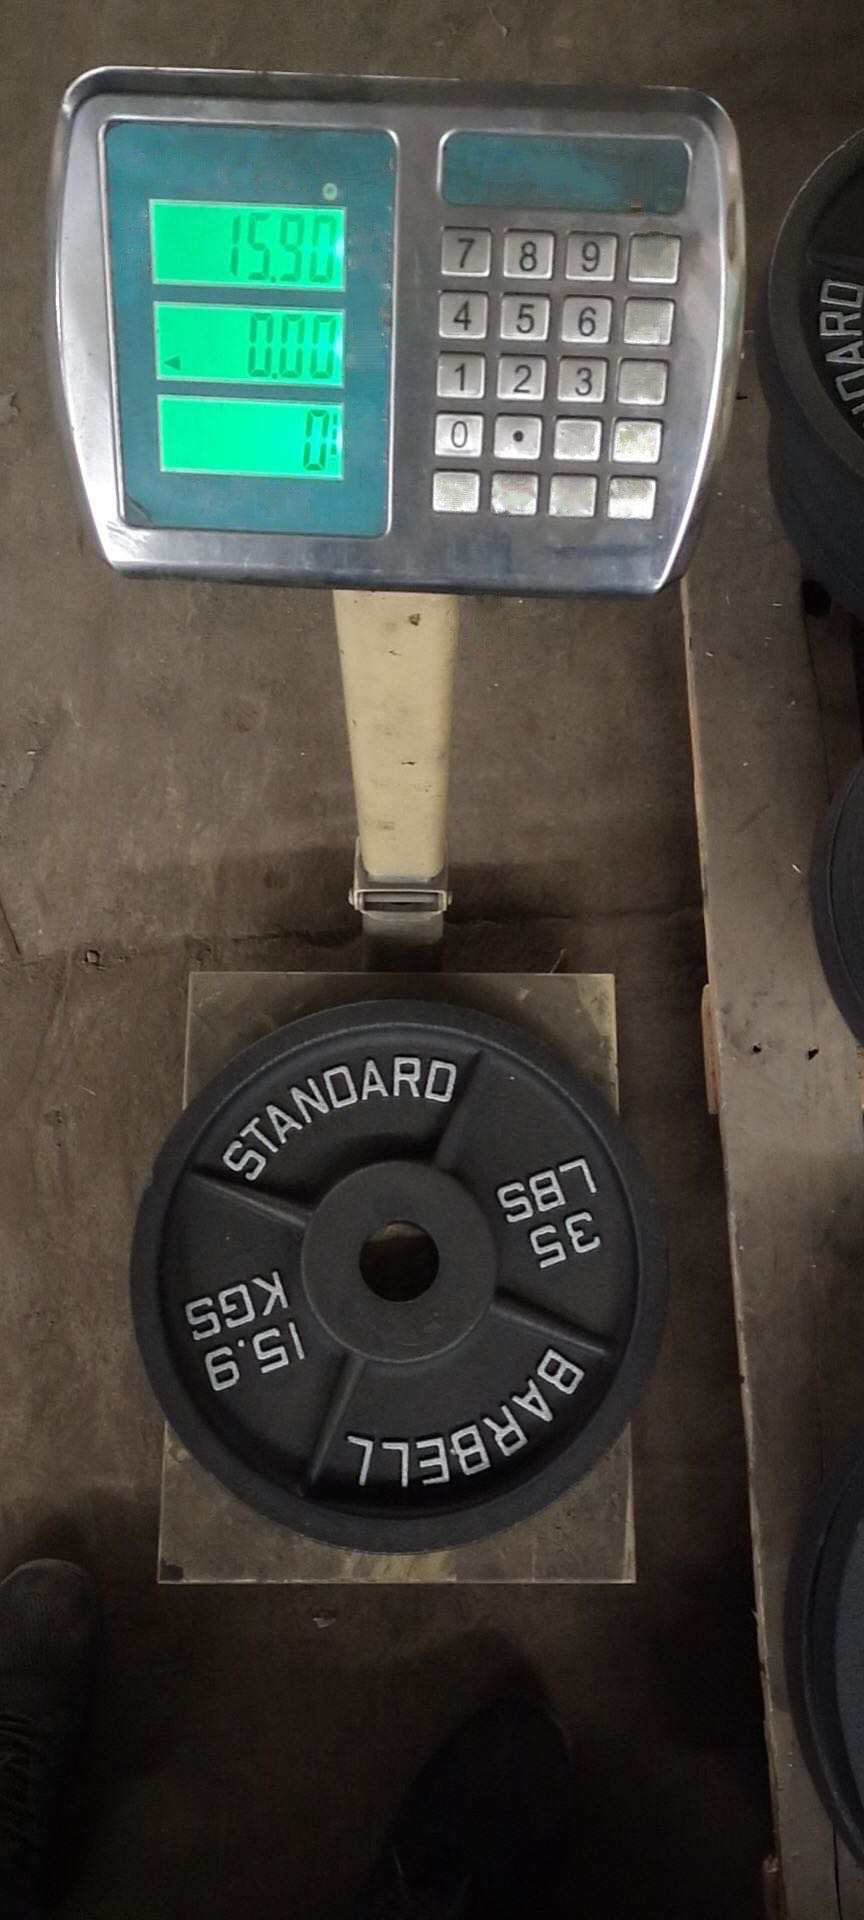 Olympic Cast Iron Weight Plates in Pairs